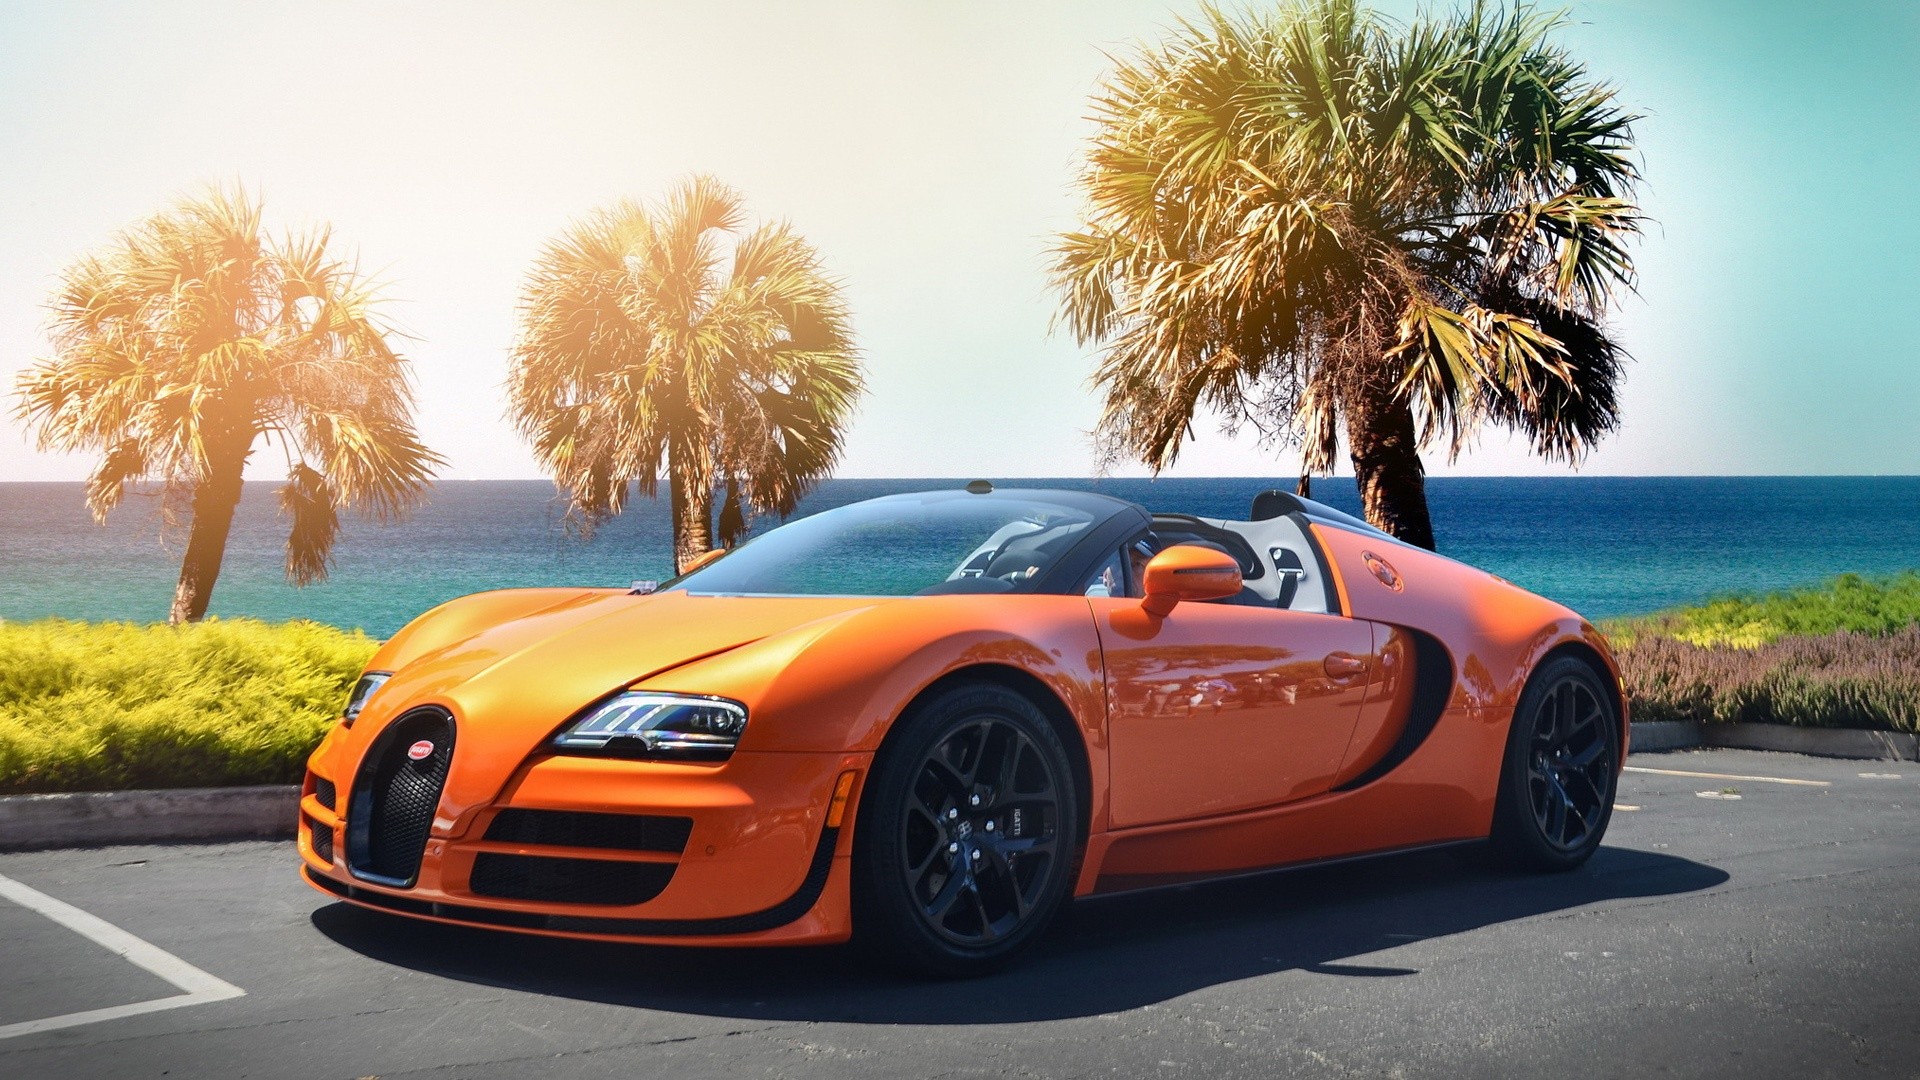 1920x1080 Awesome collection of ultimate super cars from antique to newest in town!